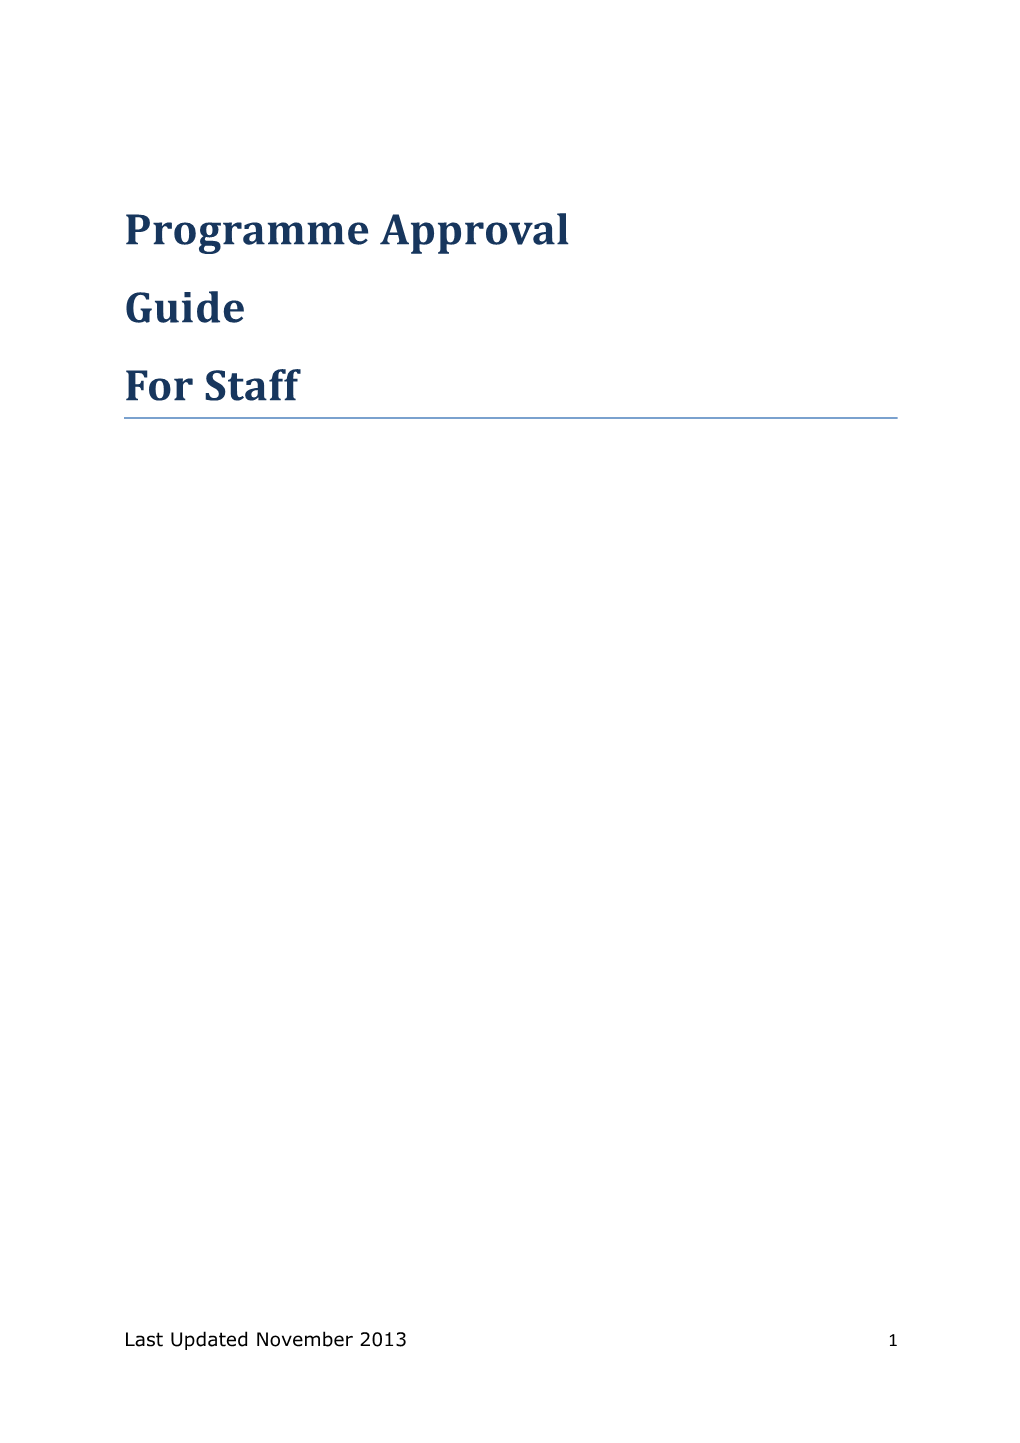 Programme Approval Guide